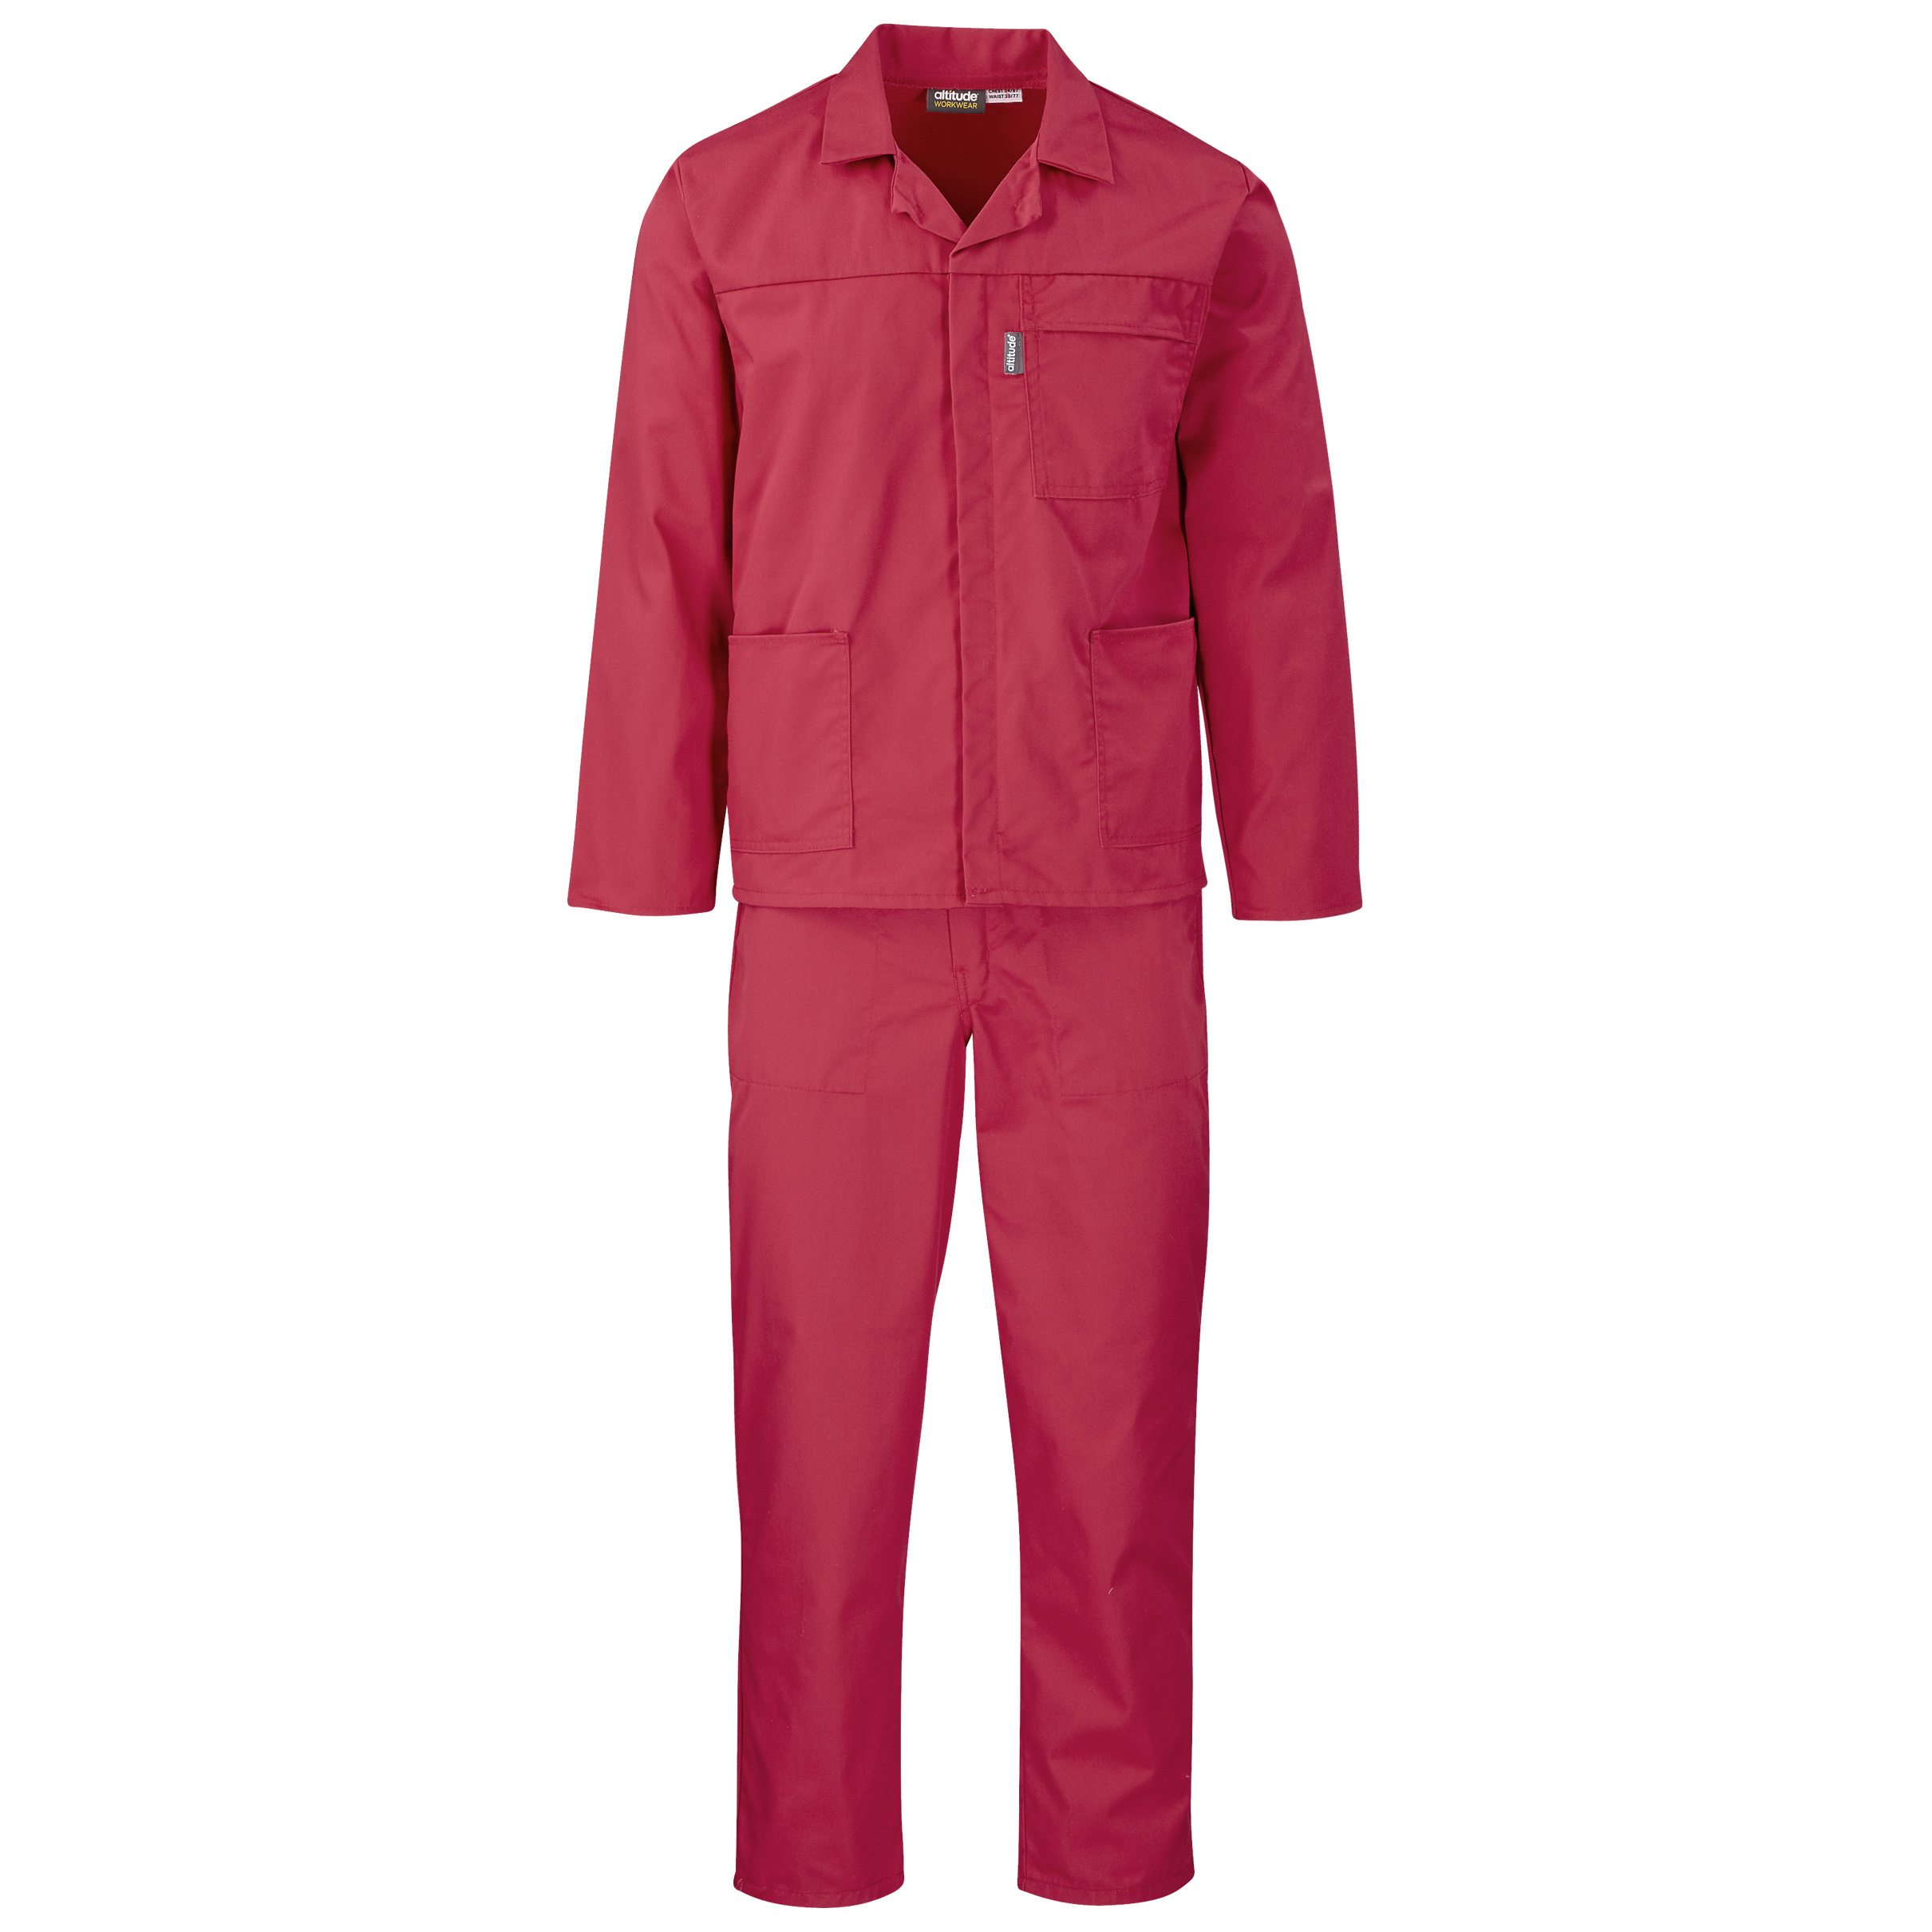 Trade Polycotton Conti Suit red ALT-1101-R_default by brandxellence workwear